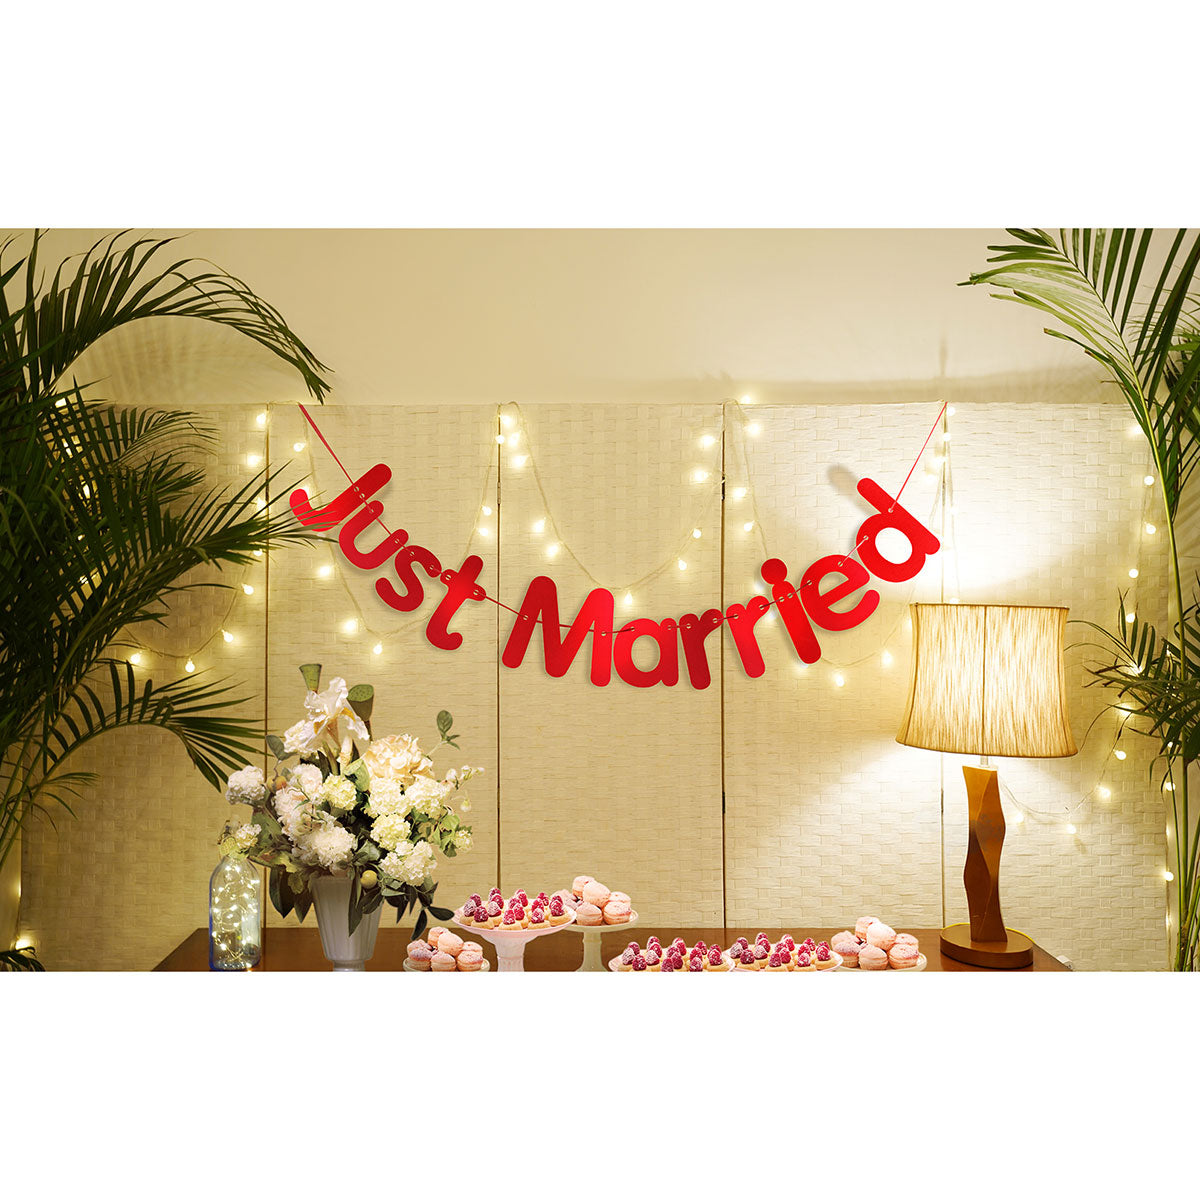 Red 'Just Married' Wedding Banner